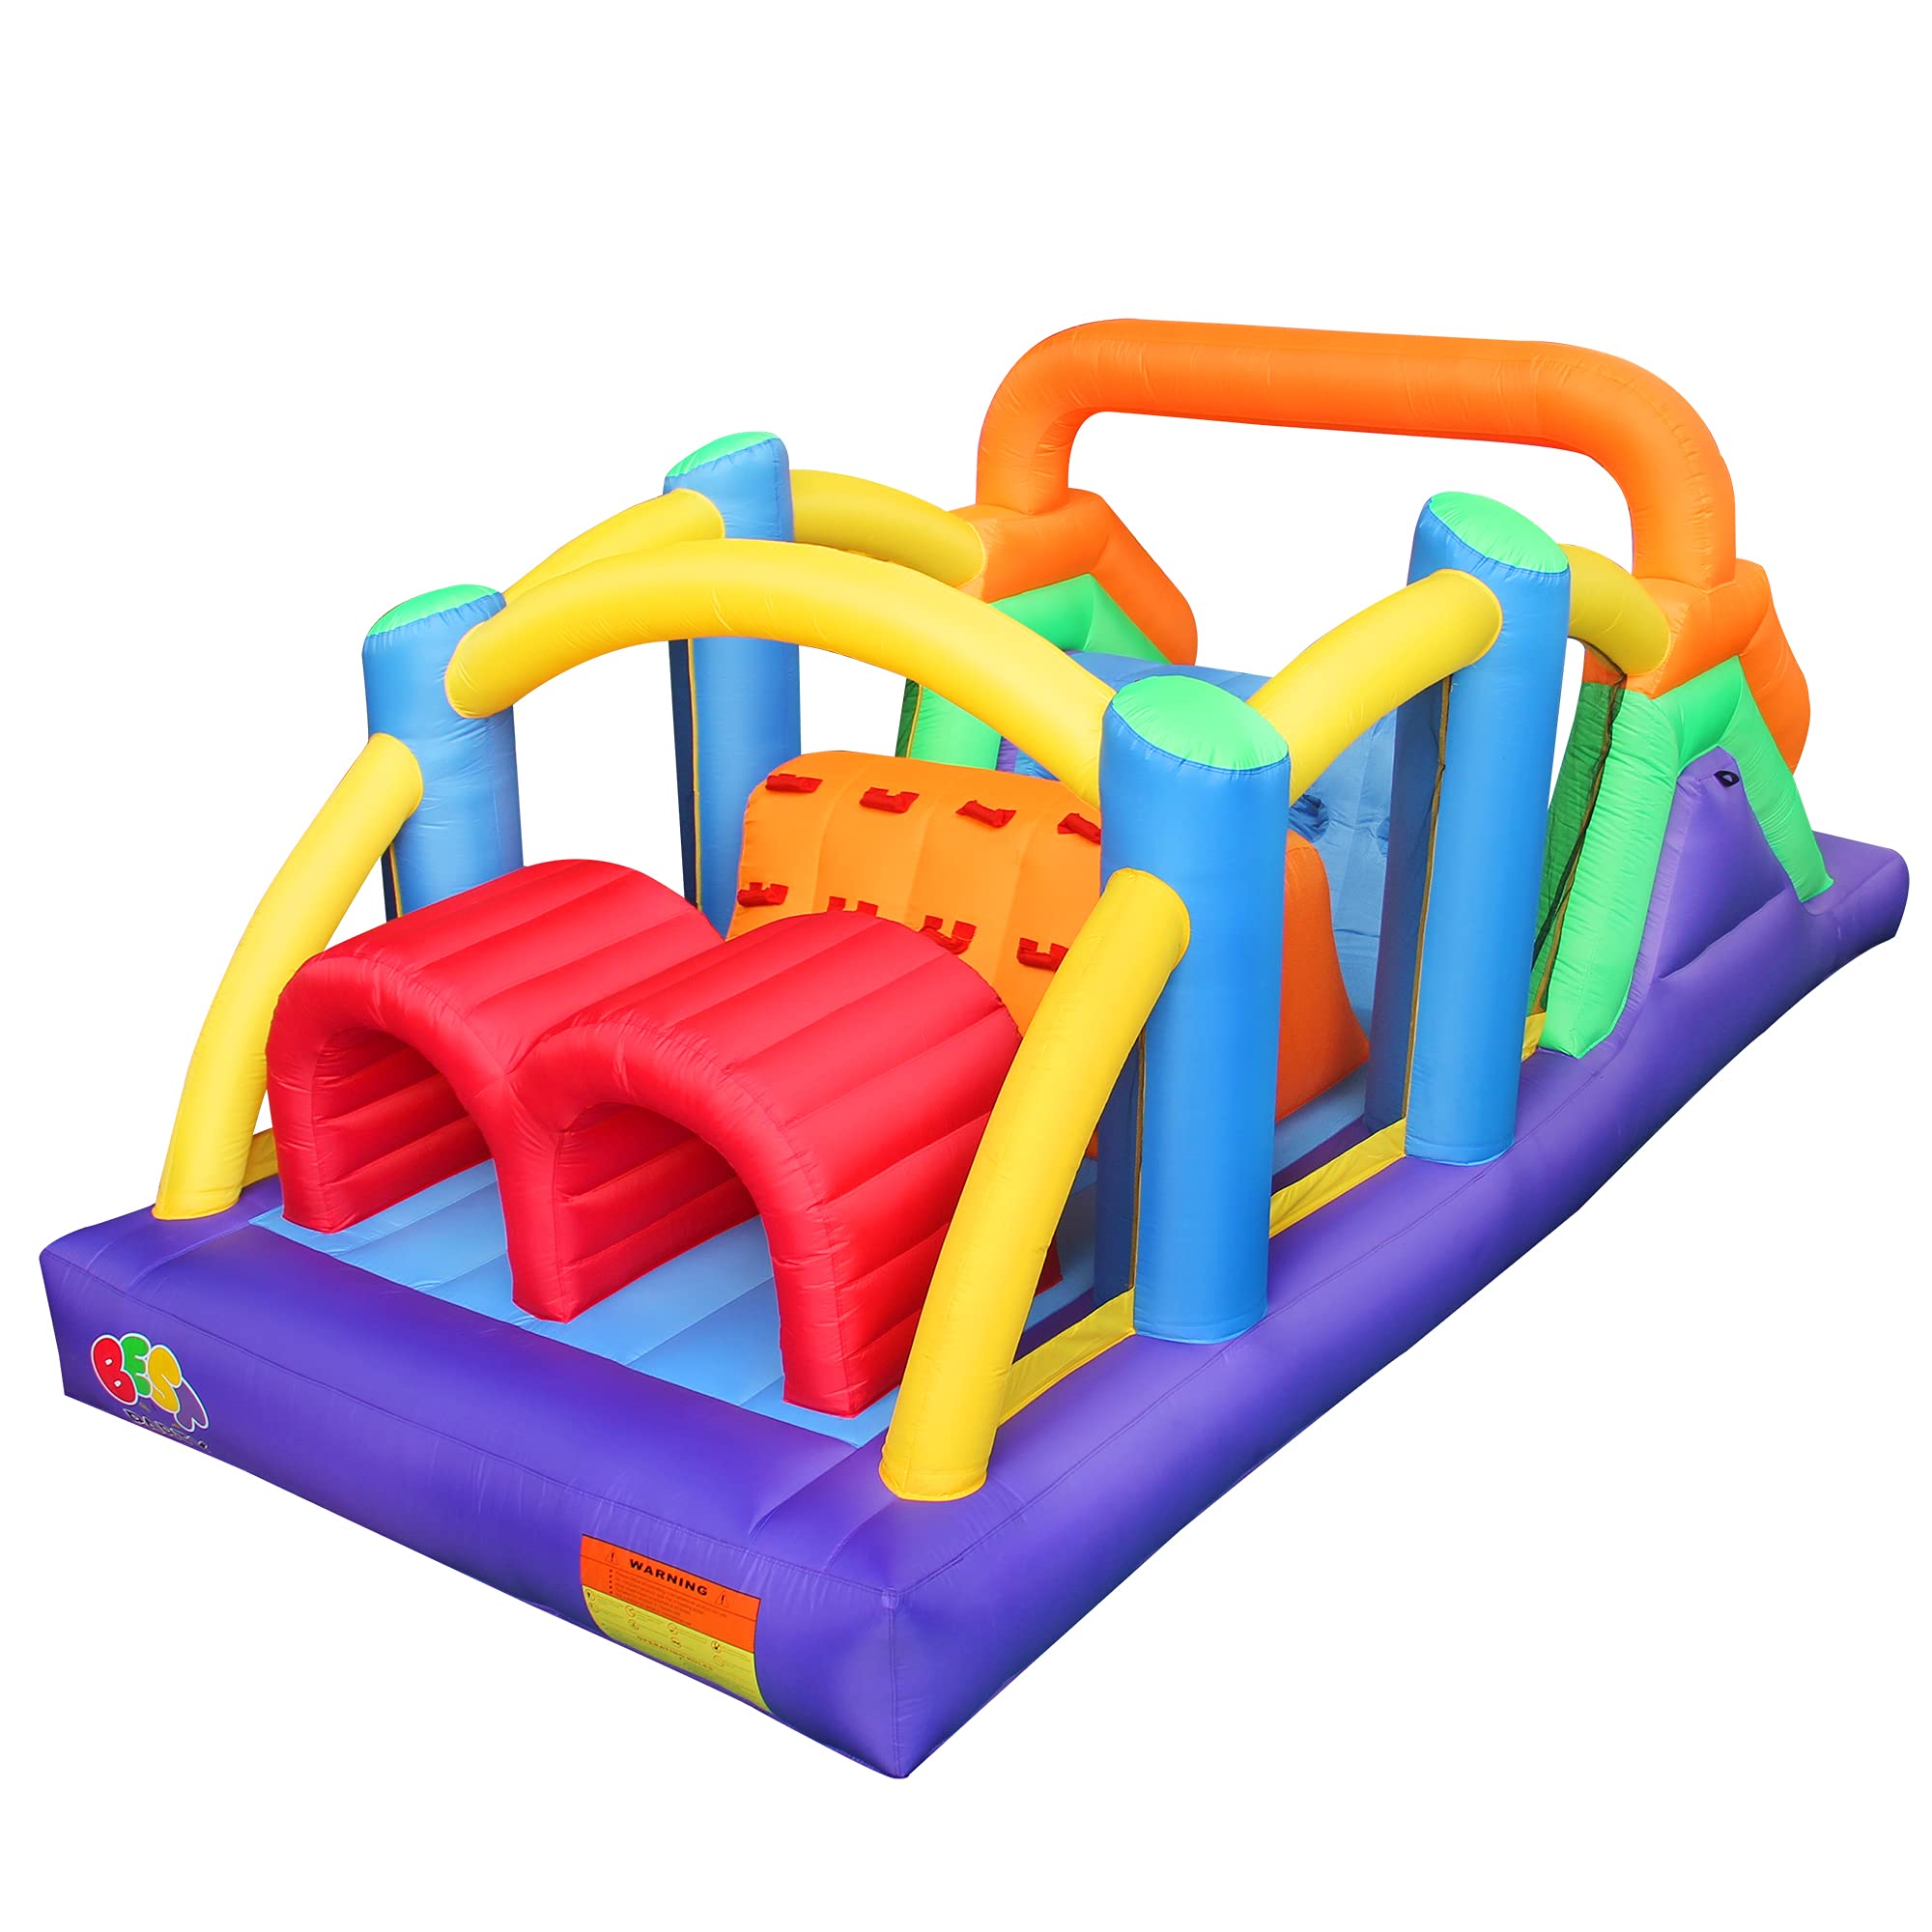 BESTPARTY Inflatable Obstacle course Bounce House castle with Large Slides Bounce Area and Obstacles Inflatable Bouncer House Ju